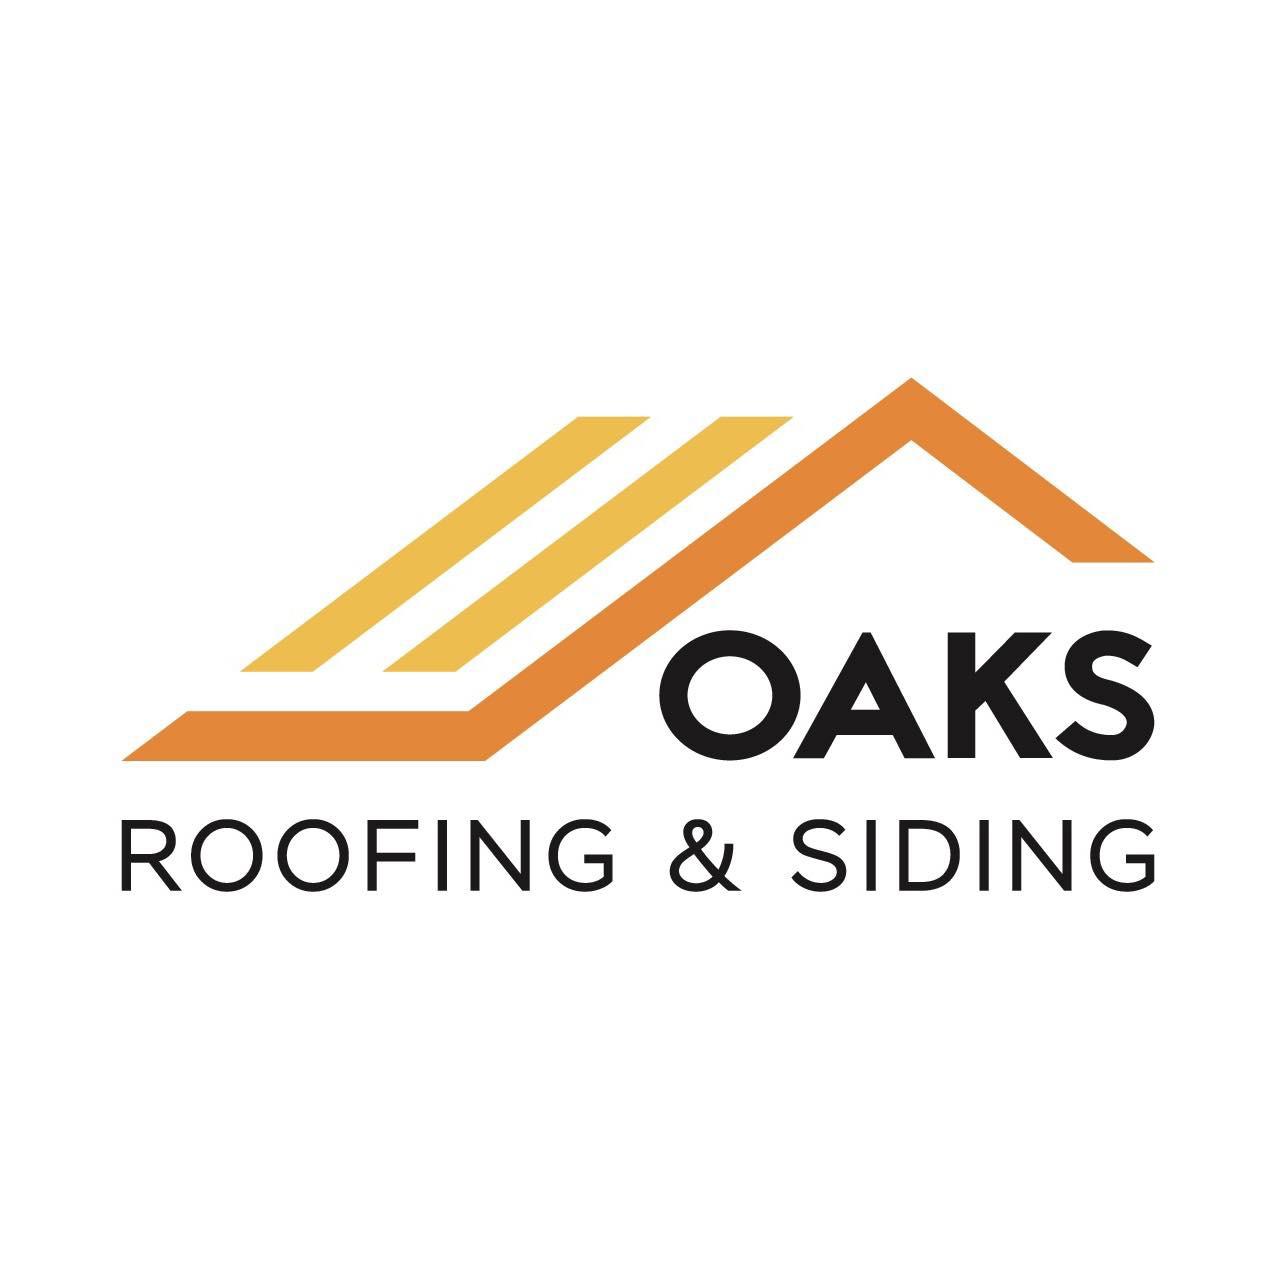 Oaks Roofing and Siding - Midland, PA - (412)887-6257 | ShowMeLocal.com